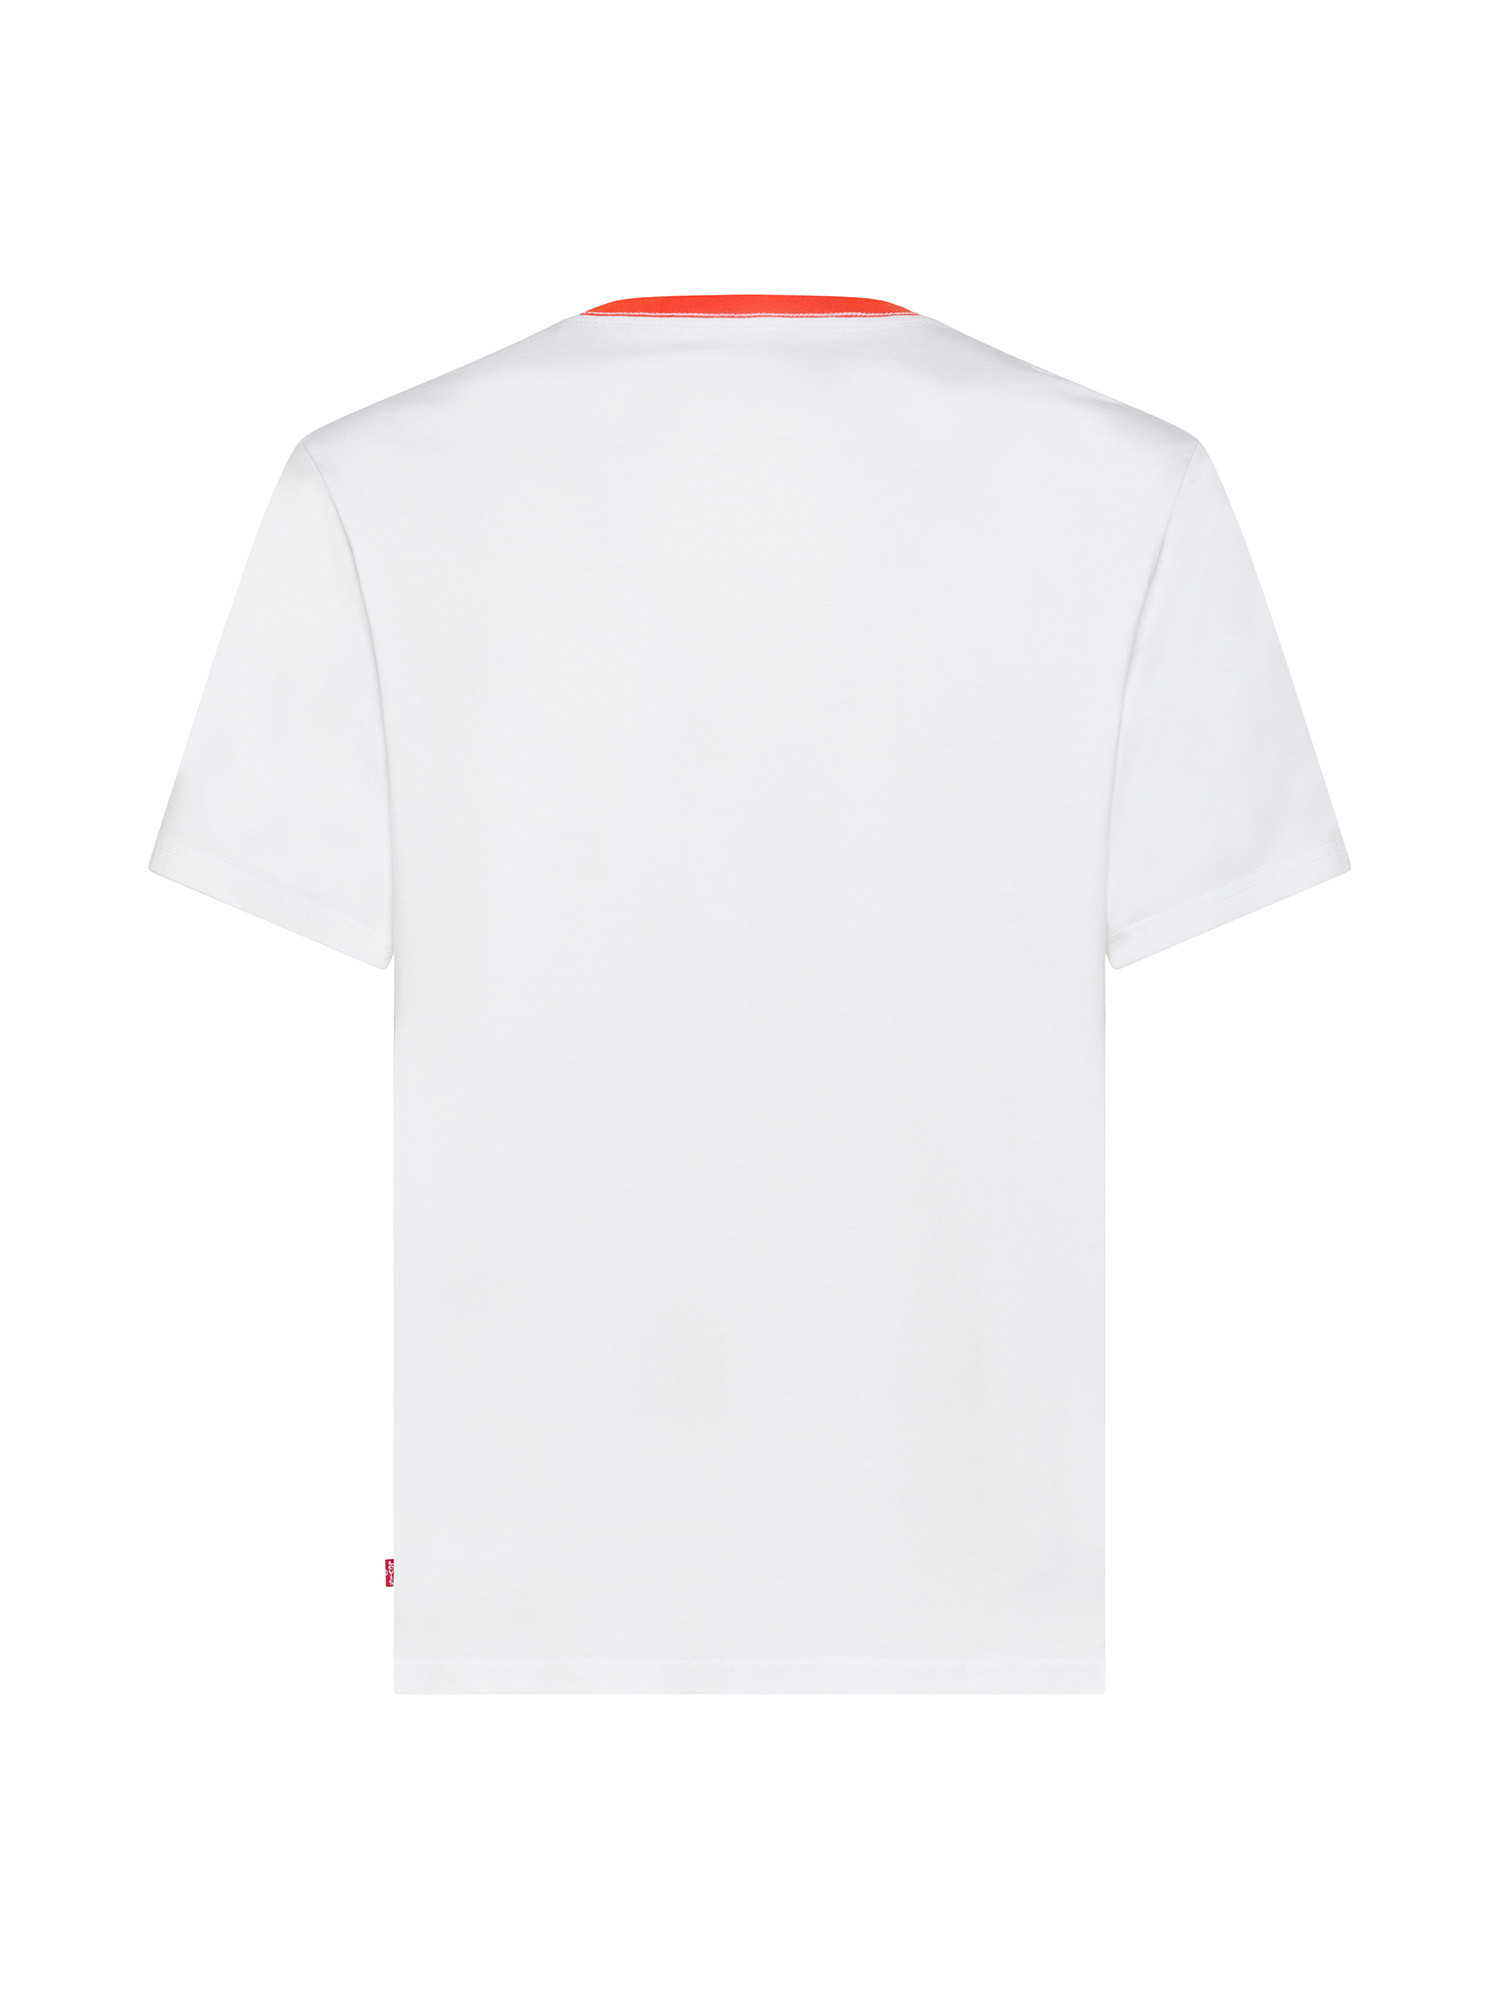 Levi's - T-shirt with print, White, large image number 1